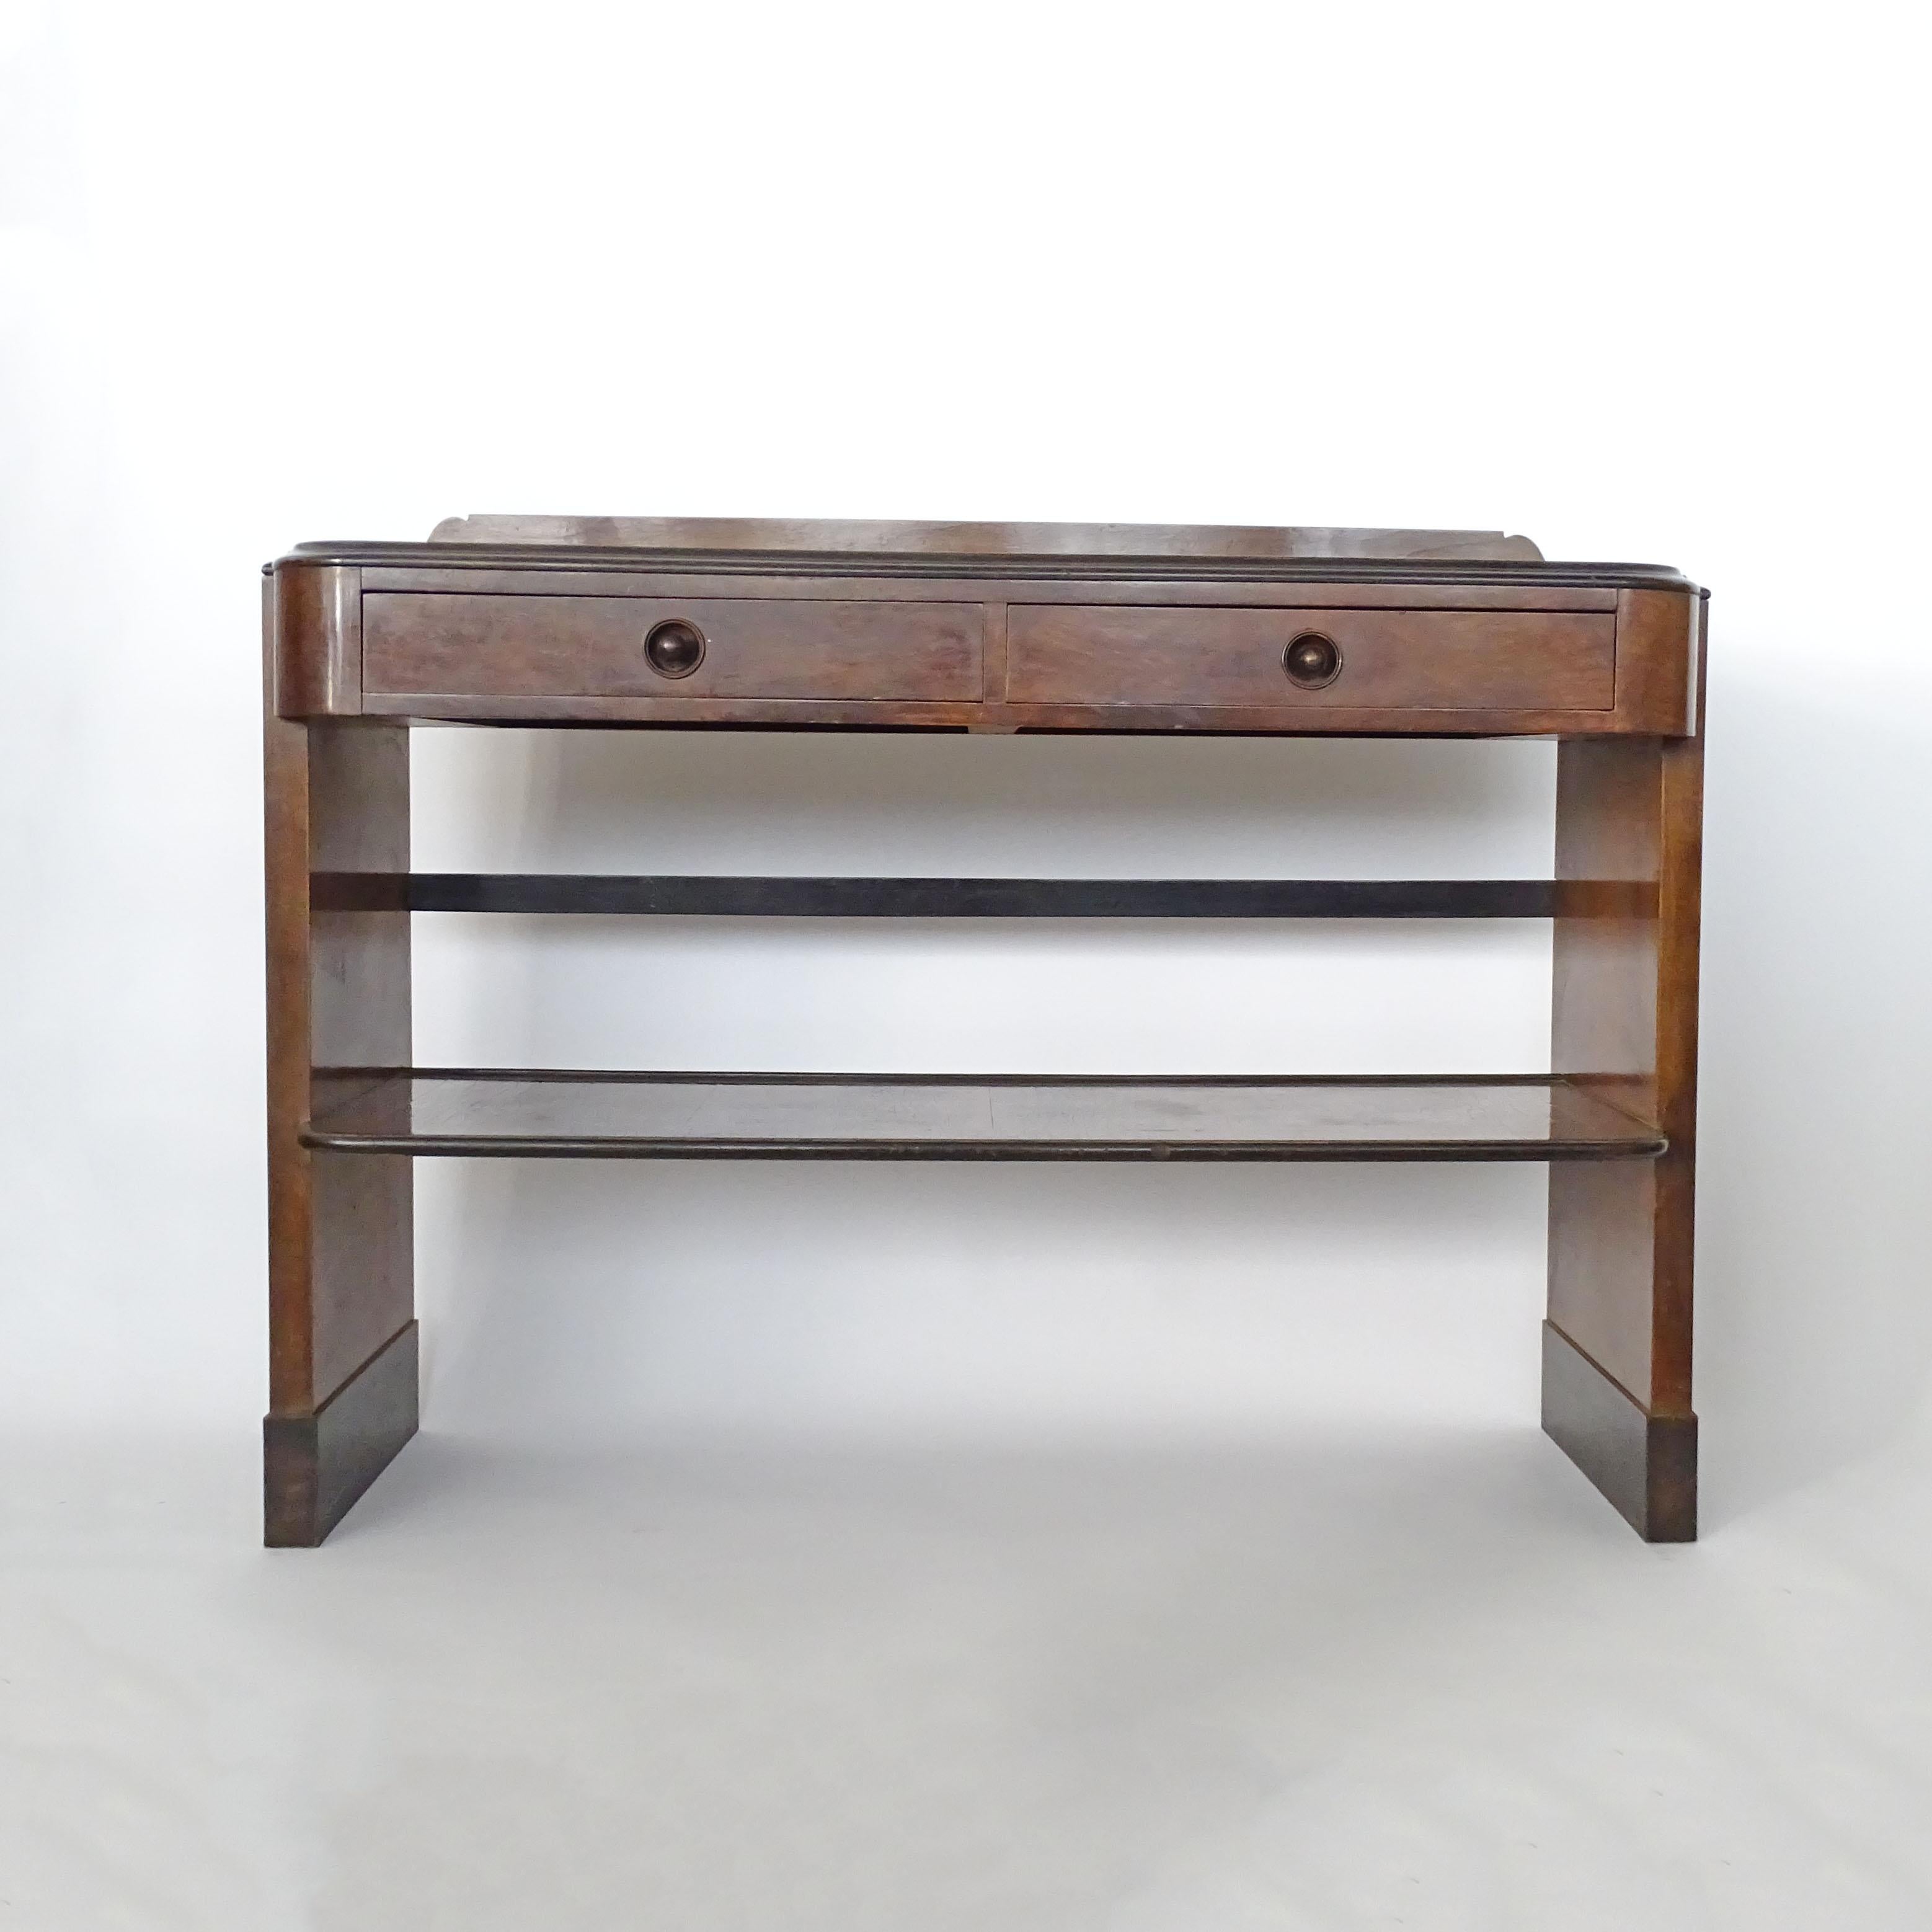 Italian Art Deco console with two drawers and a lower shelf. One drawer contains an original cutlery container in leather and wicker.
Attributed to Italian Master Architect Piero Portaluppi.